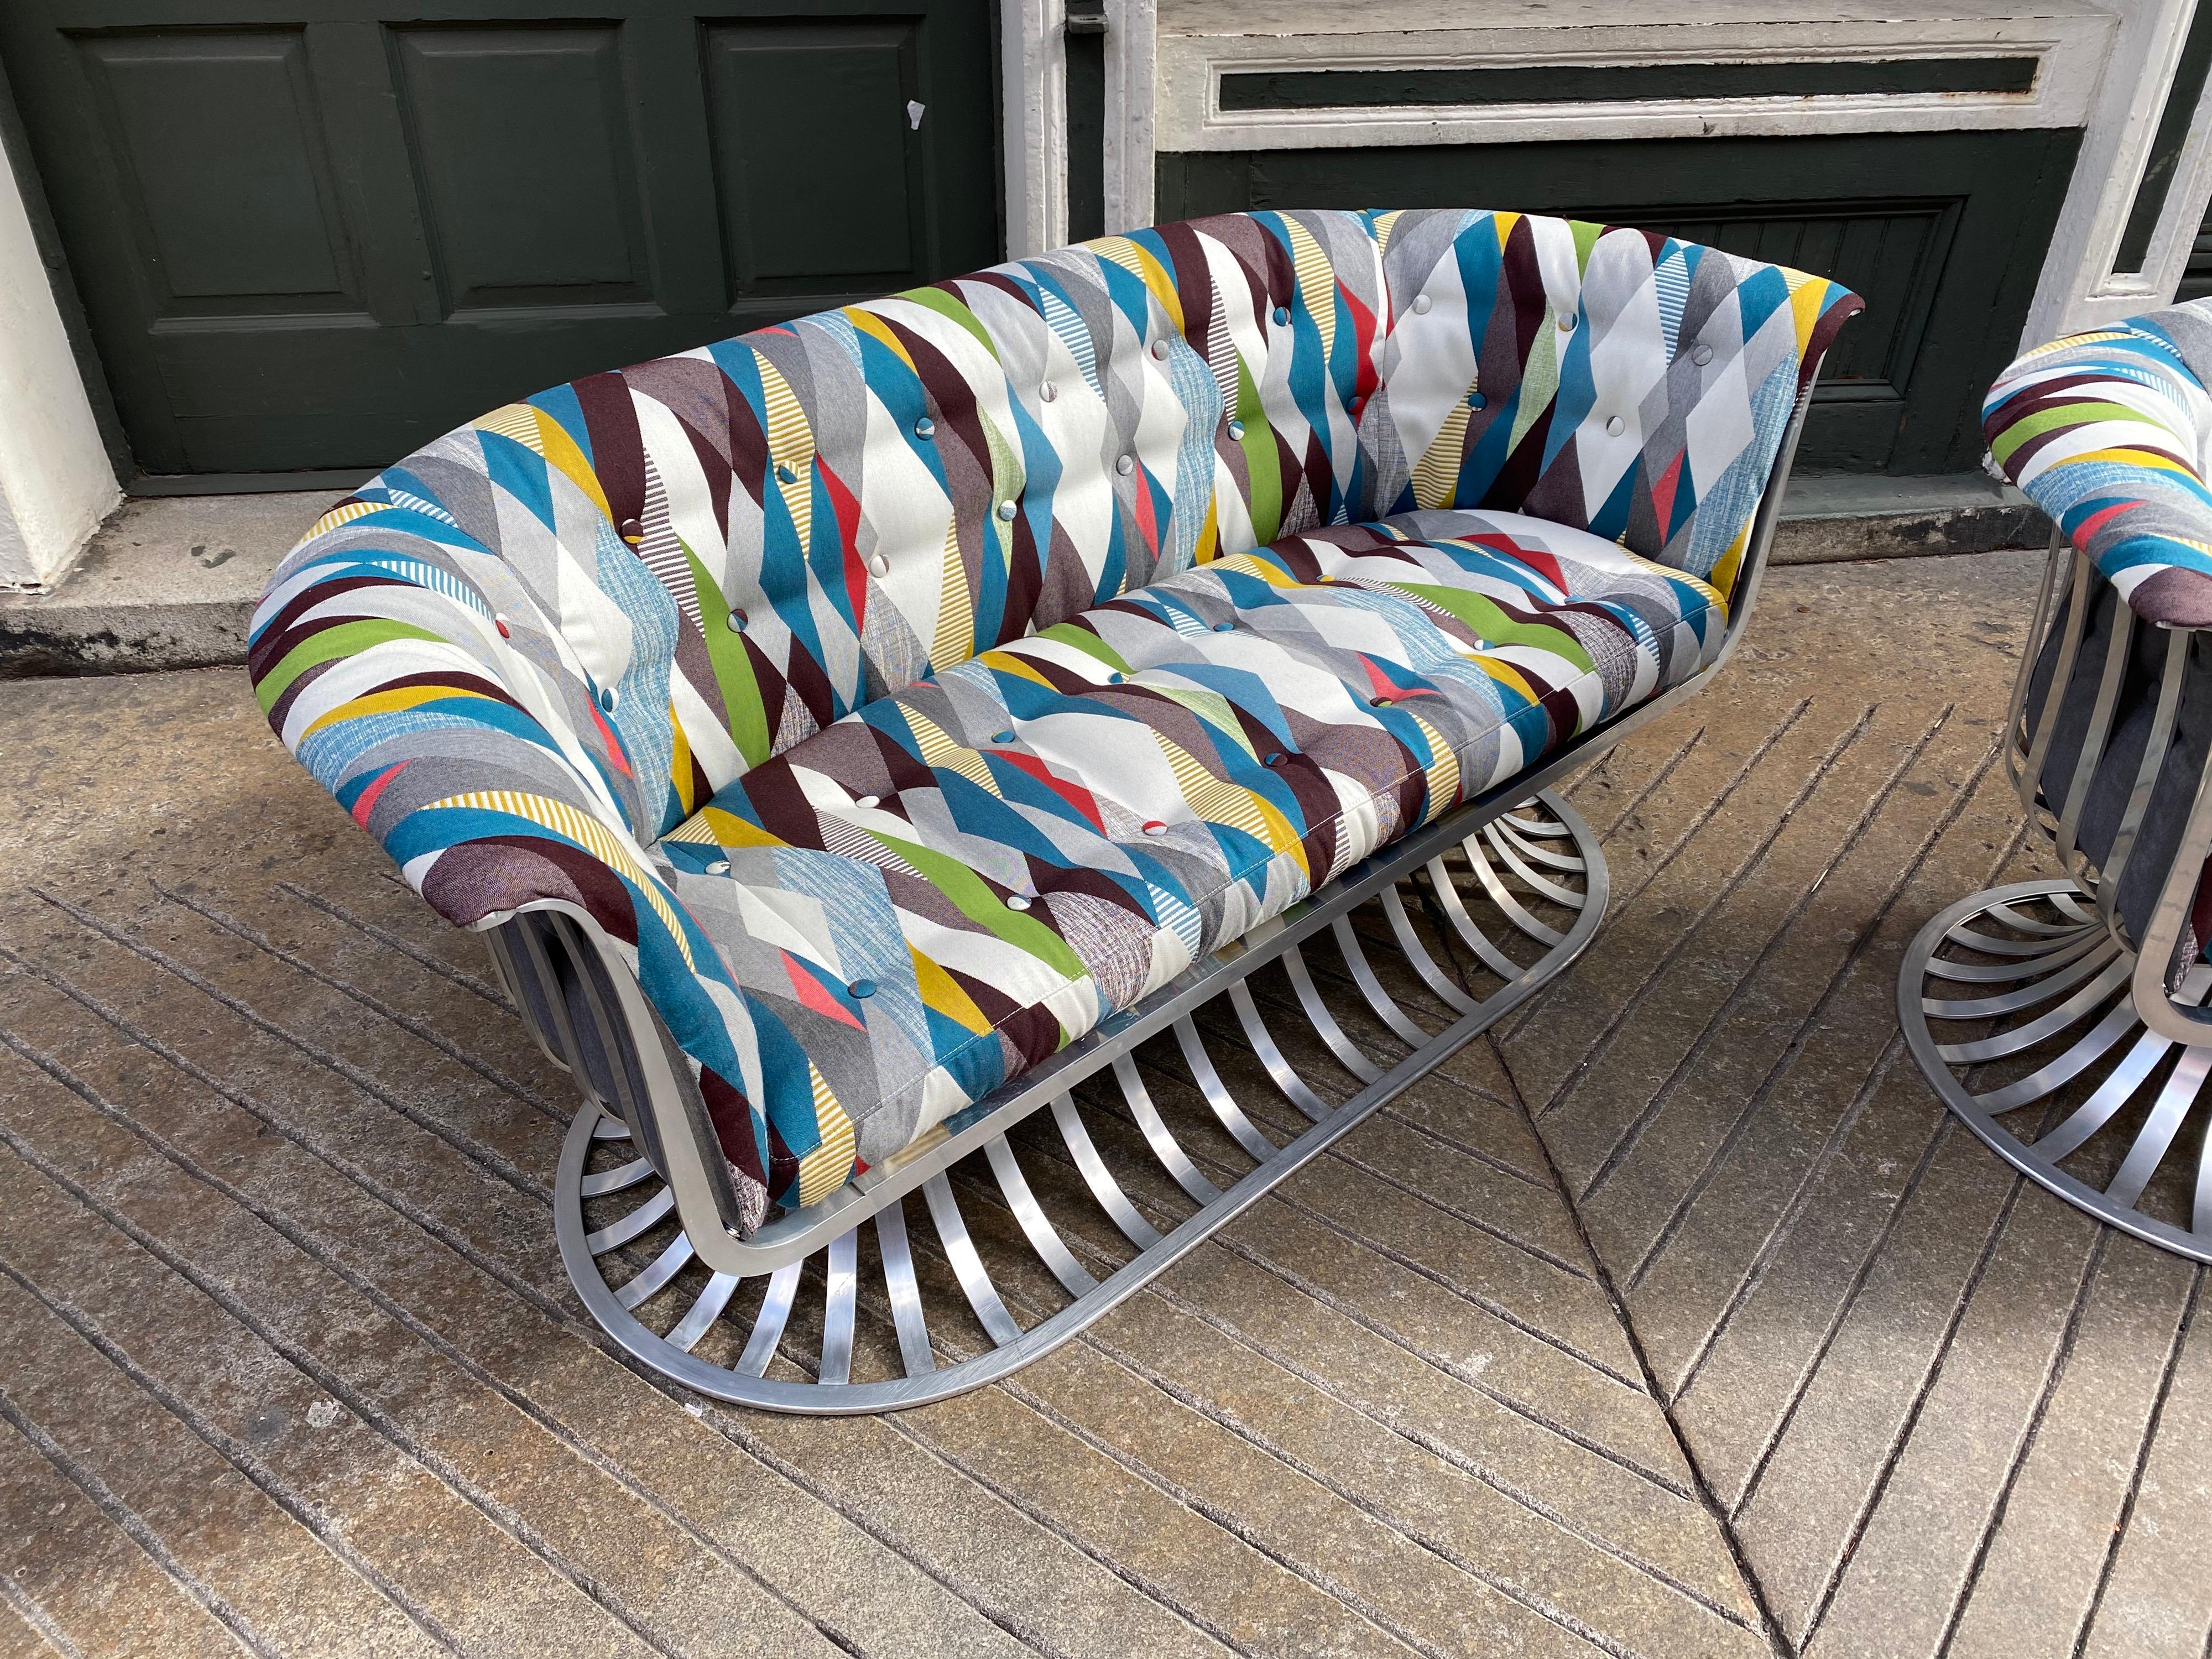 Pair of Russell Woodard aluminum loveseats, newly upholstered in a harlequin fabric in shades of blue, yellow, green and red. Entire series of aluminum furniture designed by the Woodard Furniture Company. Lightweight and easy to move! Very solid and